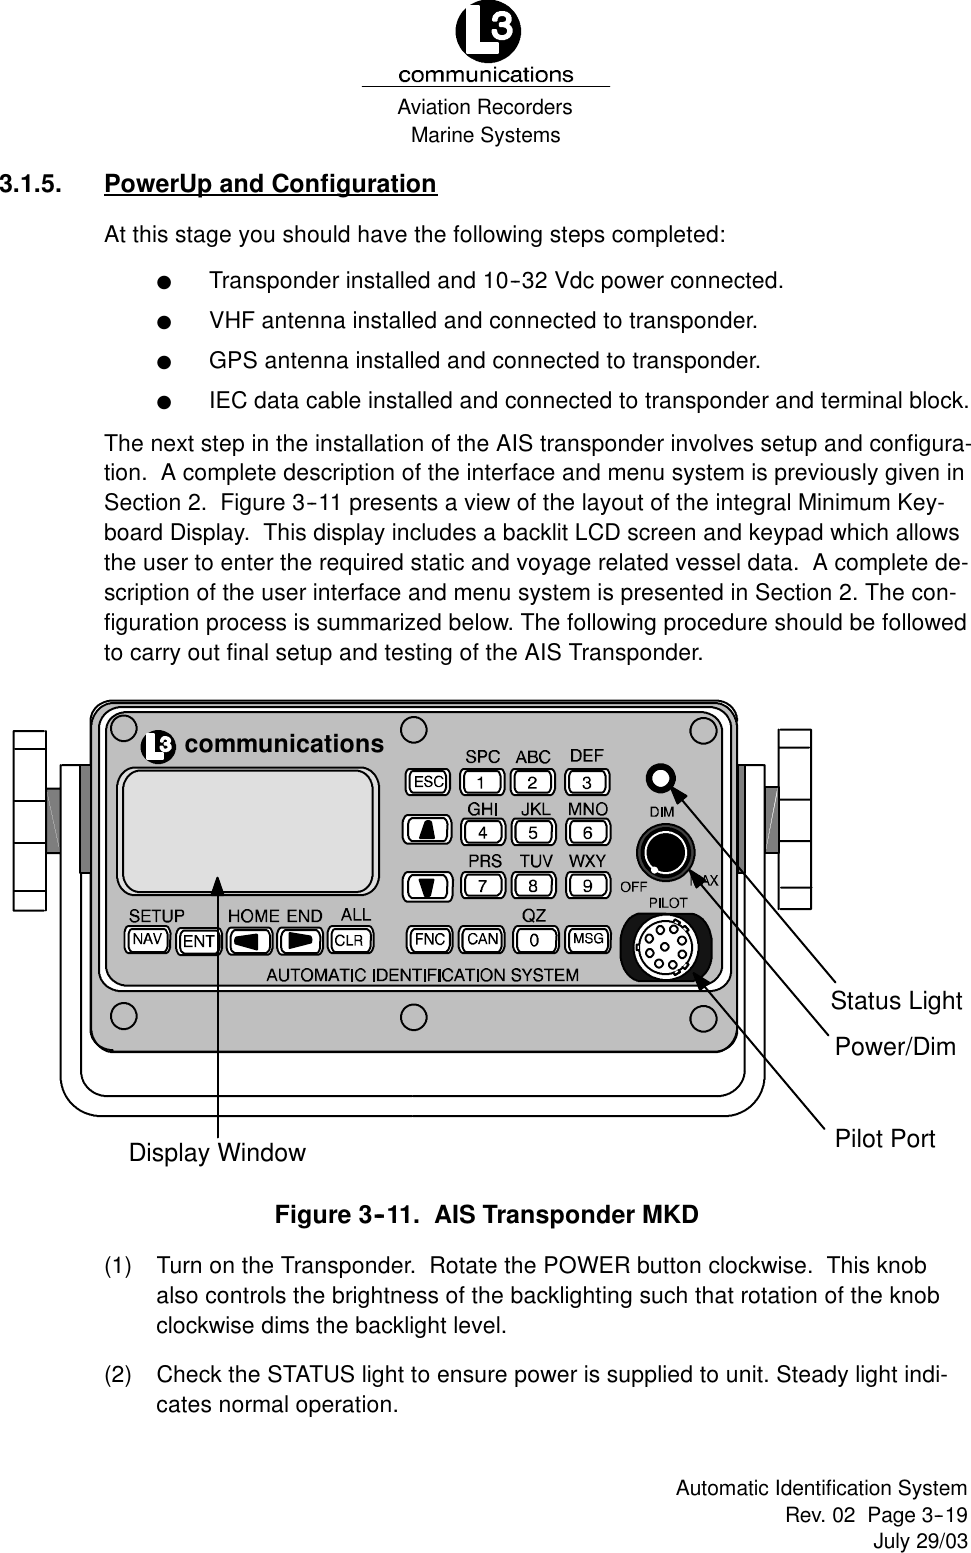 Marine SystemsAviation RecordersRev. 02 Page 3--19July 29/03Automatic Identification System3.1.5. PowerUp and ConfigurationAt this stage you should have the following steps completed:FTransponder installed and 10--32 Vdc power connected.FVHF antenna installed and connected to transponder.FGPS antenna installed and connected to transponder.FIEC data cable installed and connected to transponder and terminal block.The next step in the installation of the AIS transponder involves setup and configura-tion. A complete description of the interface and menu system is previously given inSection 2. Figure 3--11 presents a view of the layout of the integral Minimum Key-board Display. This display includes a backlit LCD screen and keypad which allowsthe user to enter the required static and voyage related vessel data. A complete de-scription of the user interface and menu system is presented in Section 2. The con-figuration process is summarized below. The following procedure should be followedto carry out final setup and testing of the AIS Transponder.communicationsPower/DimStatus LightPilot PortDisplay WindowFigure 3--11. AIS Transponder MKD(1) Turn on the Transponder. Rotate the POWER button clockwise. This knobalso controls the brightness of the backlighting such that rotation of the knobclockwise dims the backlight level.(2) Check the STATUS light to ensure power is supplied to unit. Steady light indi-cates normal operation.